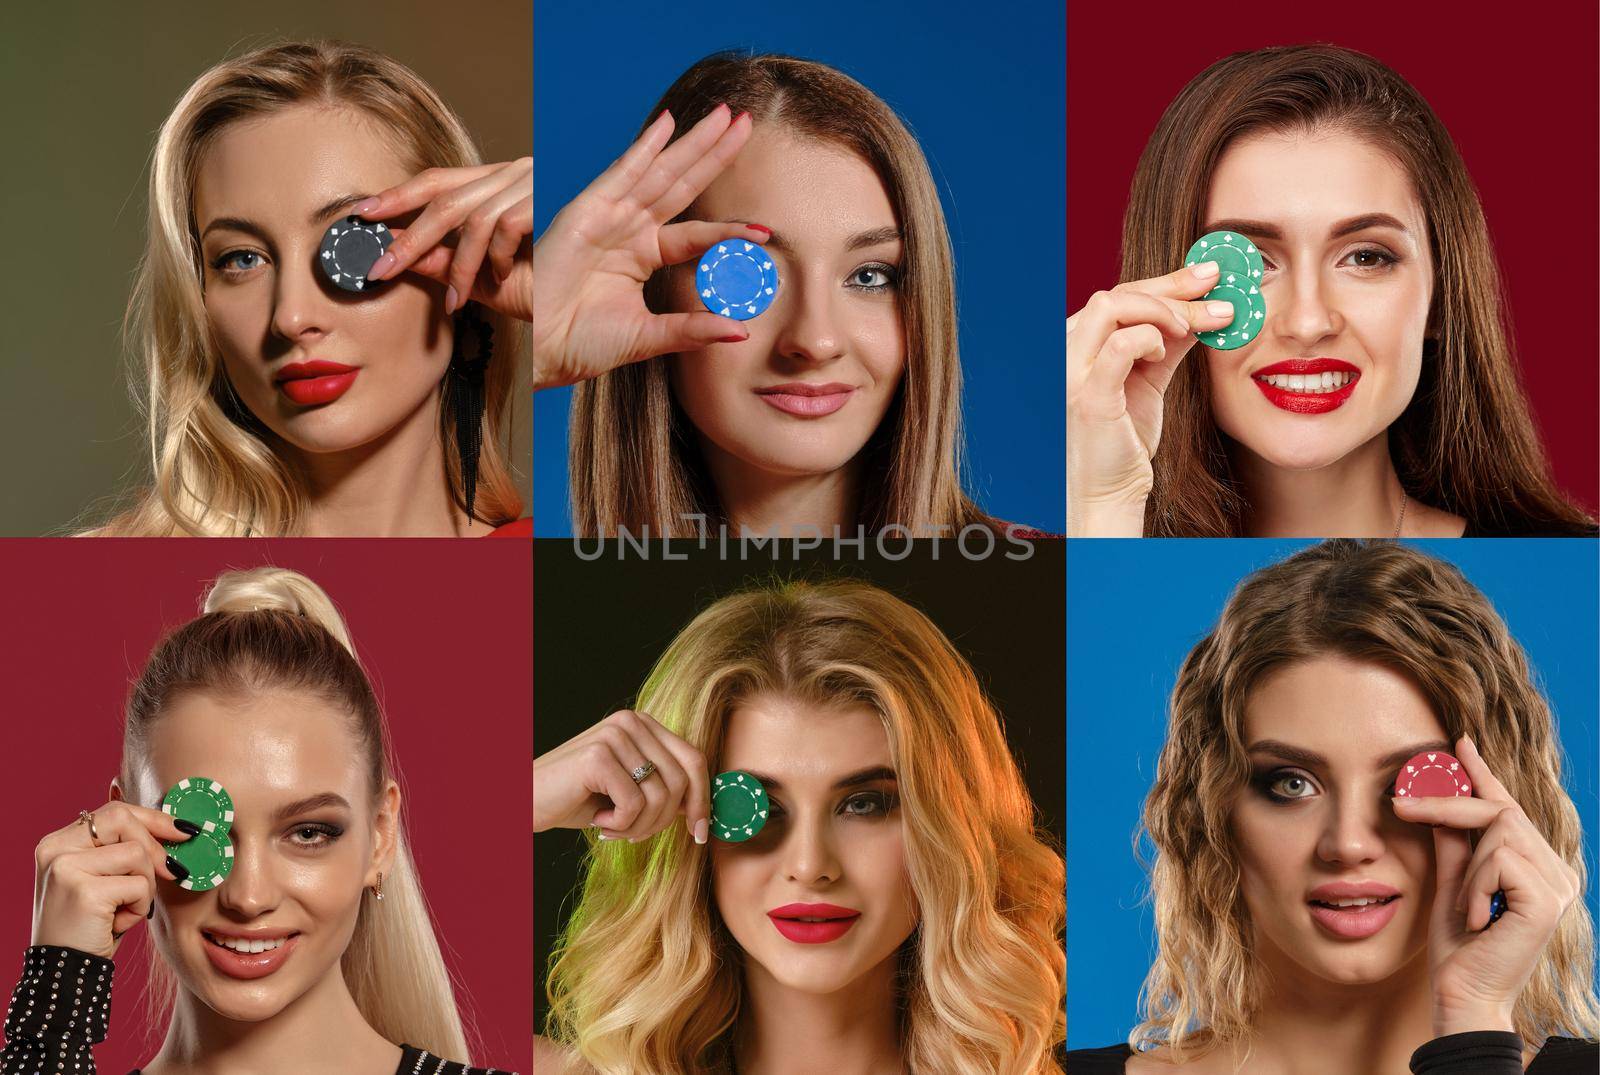 Collage of charming women with bright make-up and stylish hairstyles, in jewelry. They are smiling, covered one eye by chips, posing on colorful backgrounds. Gambling, poker, casino. Close-up